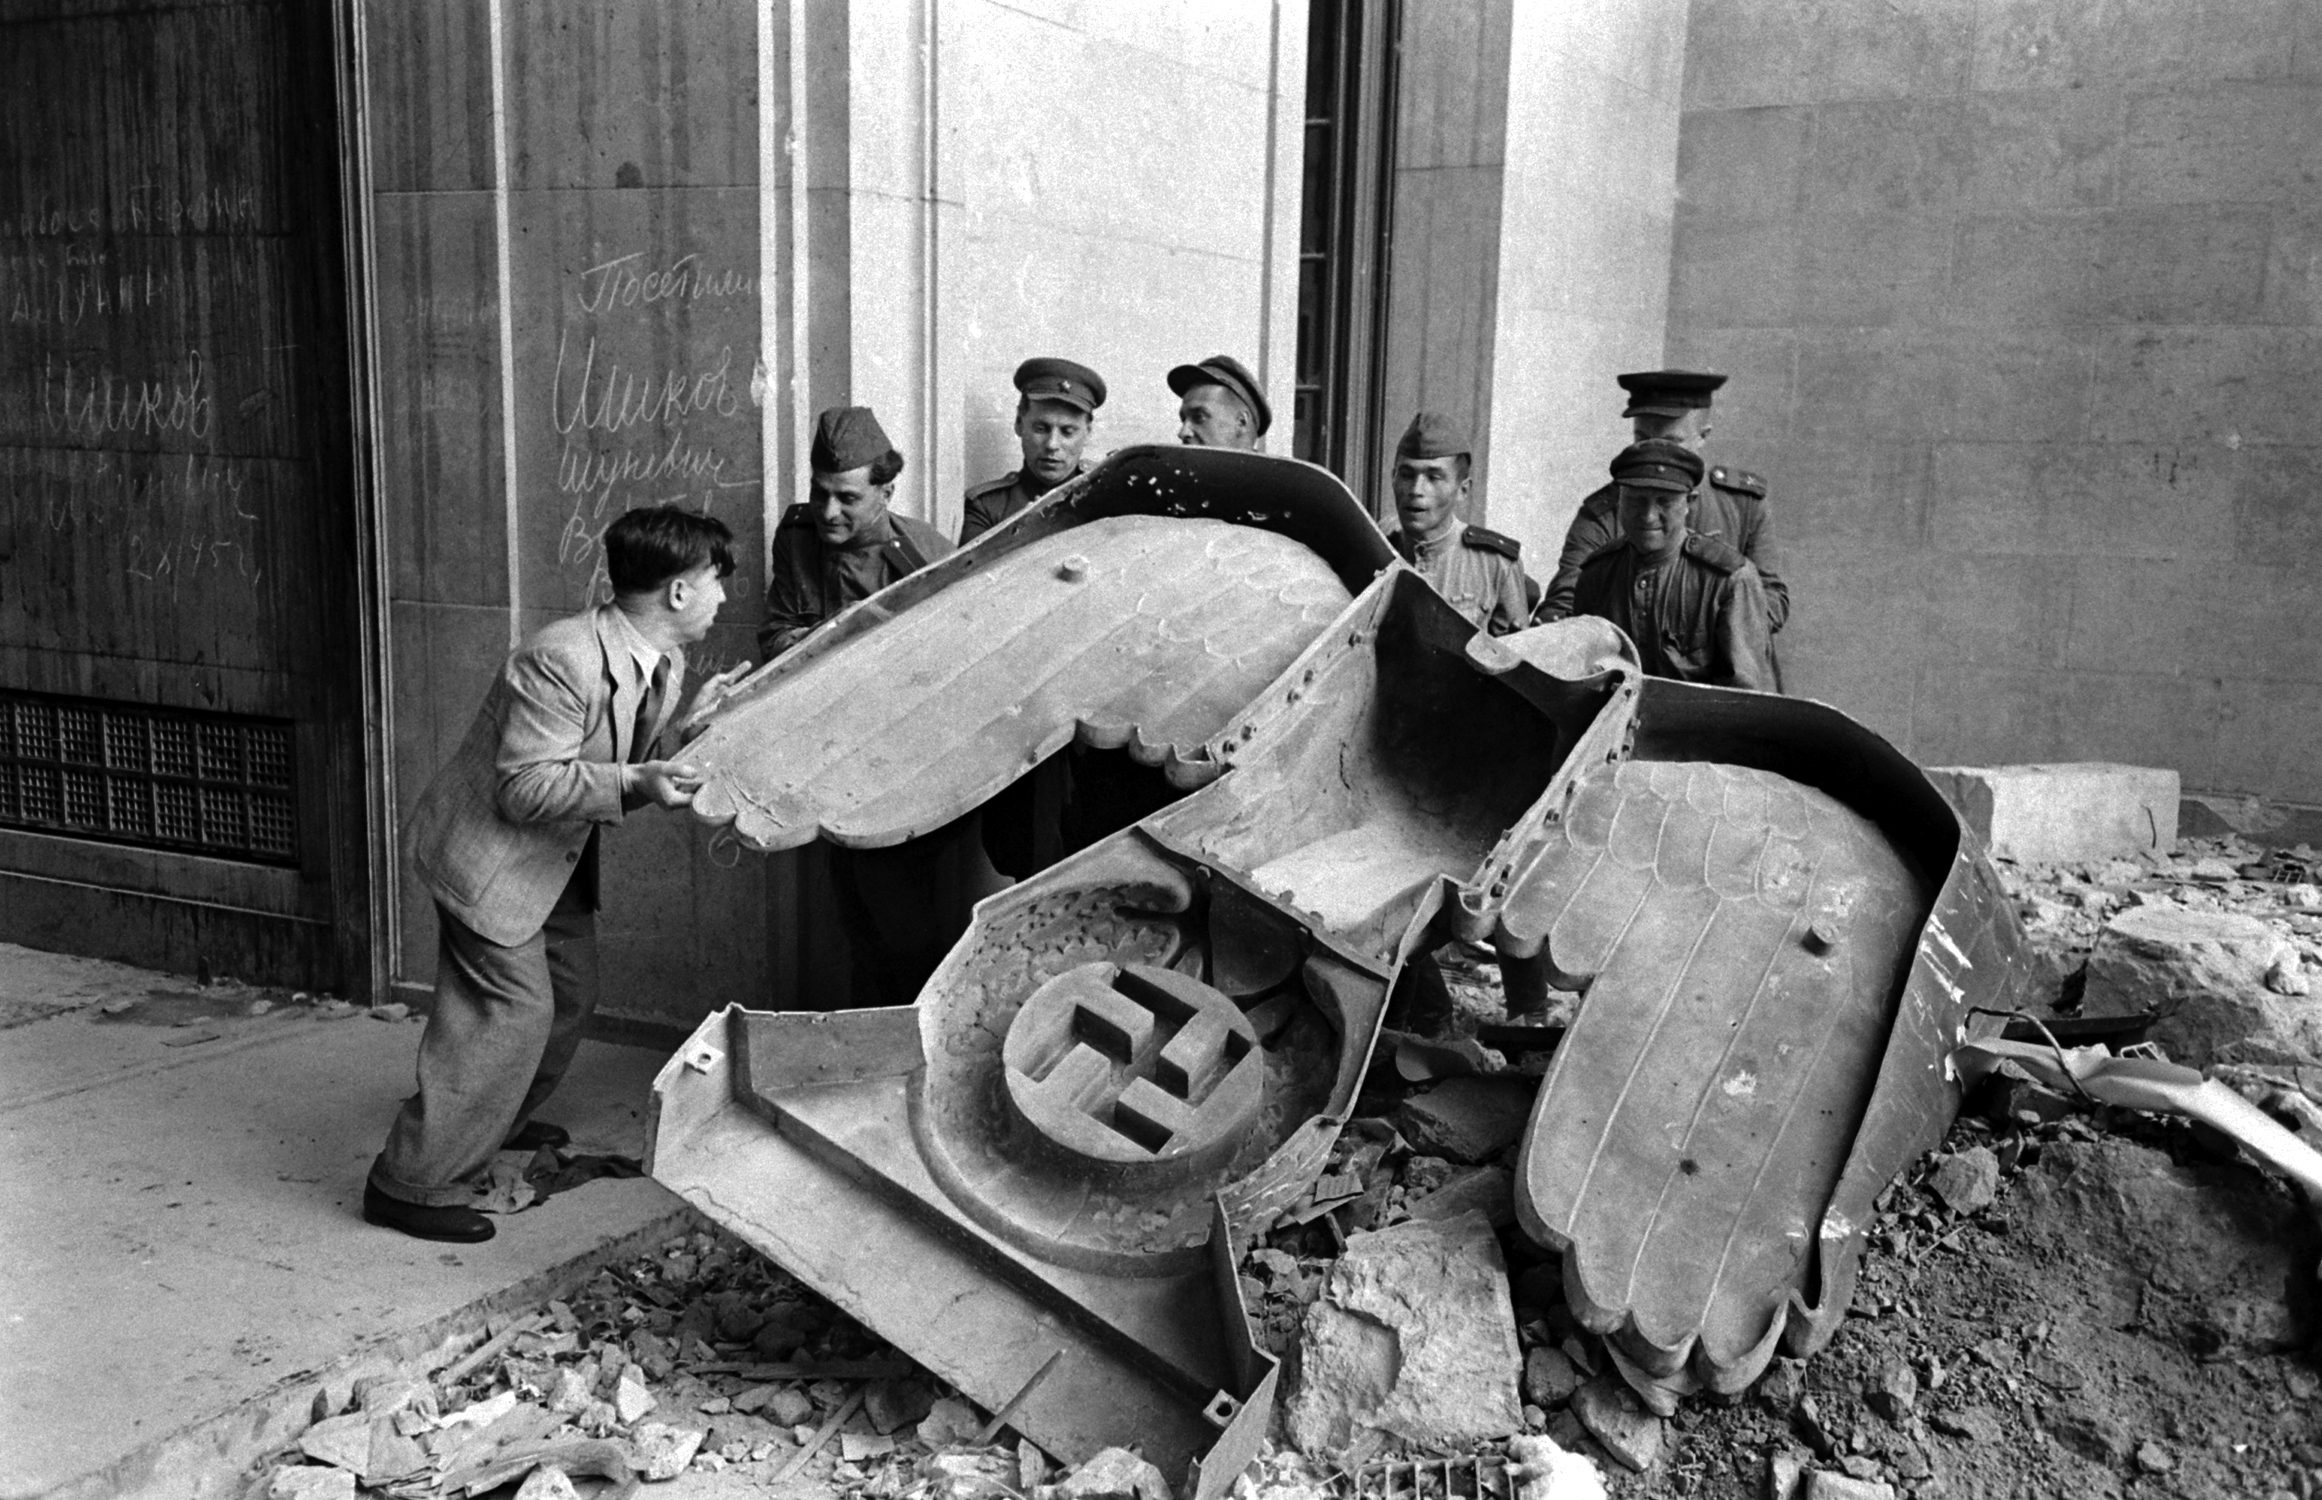 Russian soldiers and a civilian struggle to move a large bronze Nazi Party eagle that once loomed over a doorway of the Reich Chancellery, Berlin, 1945.